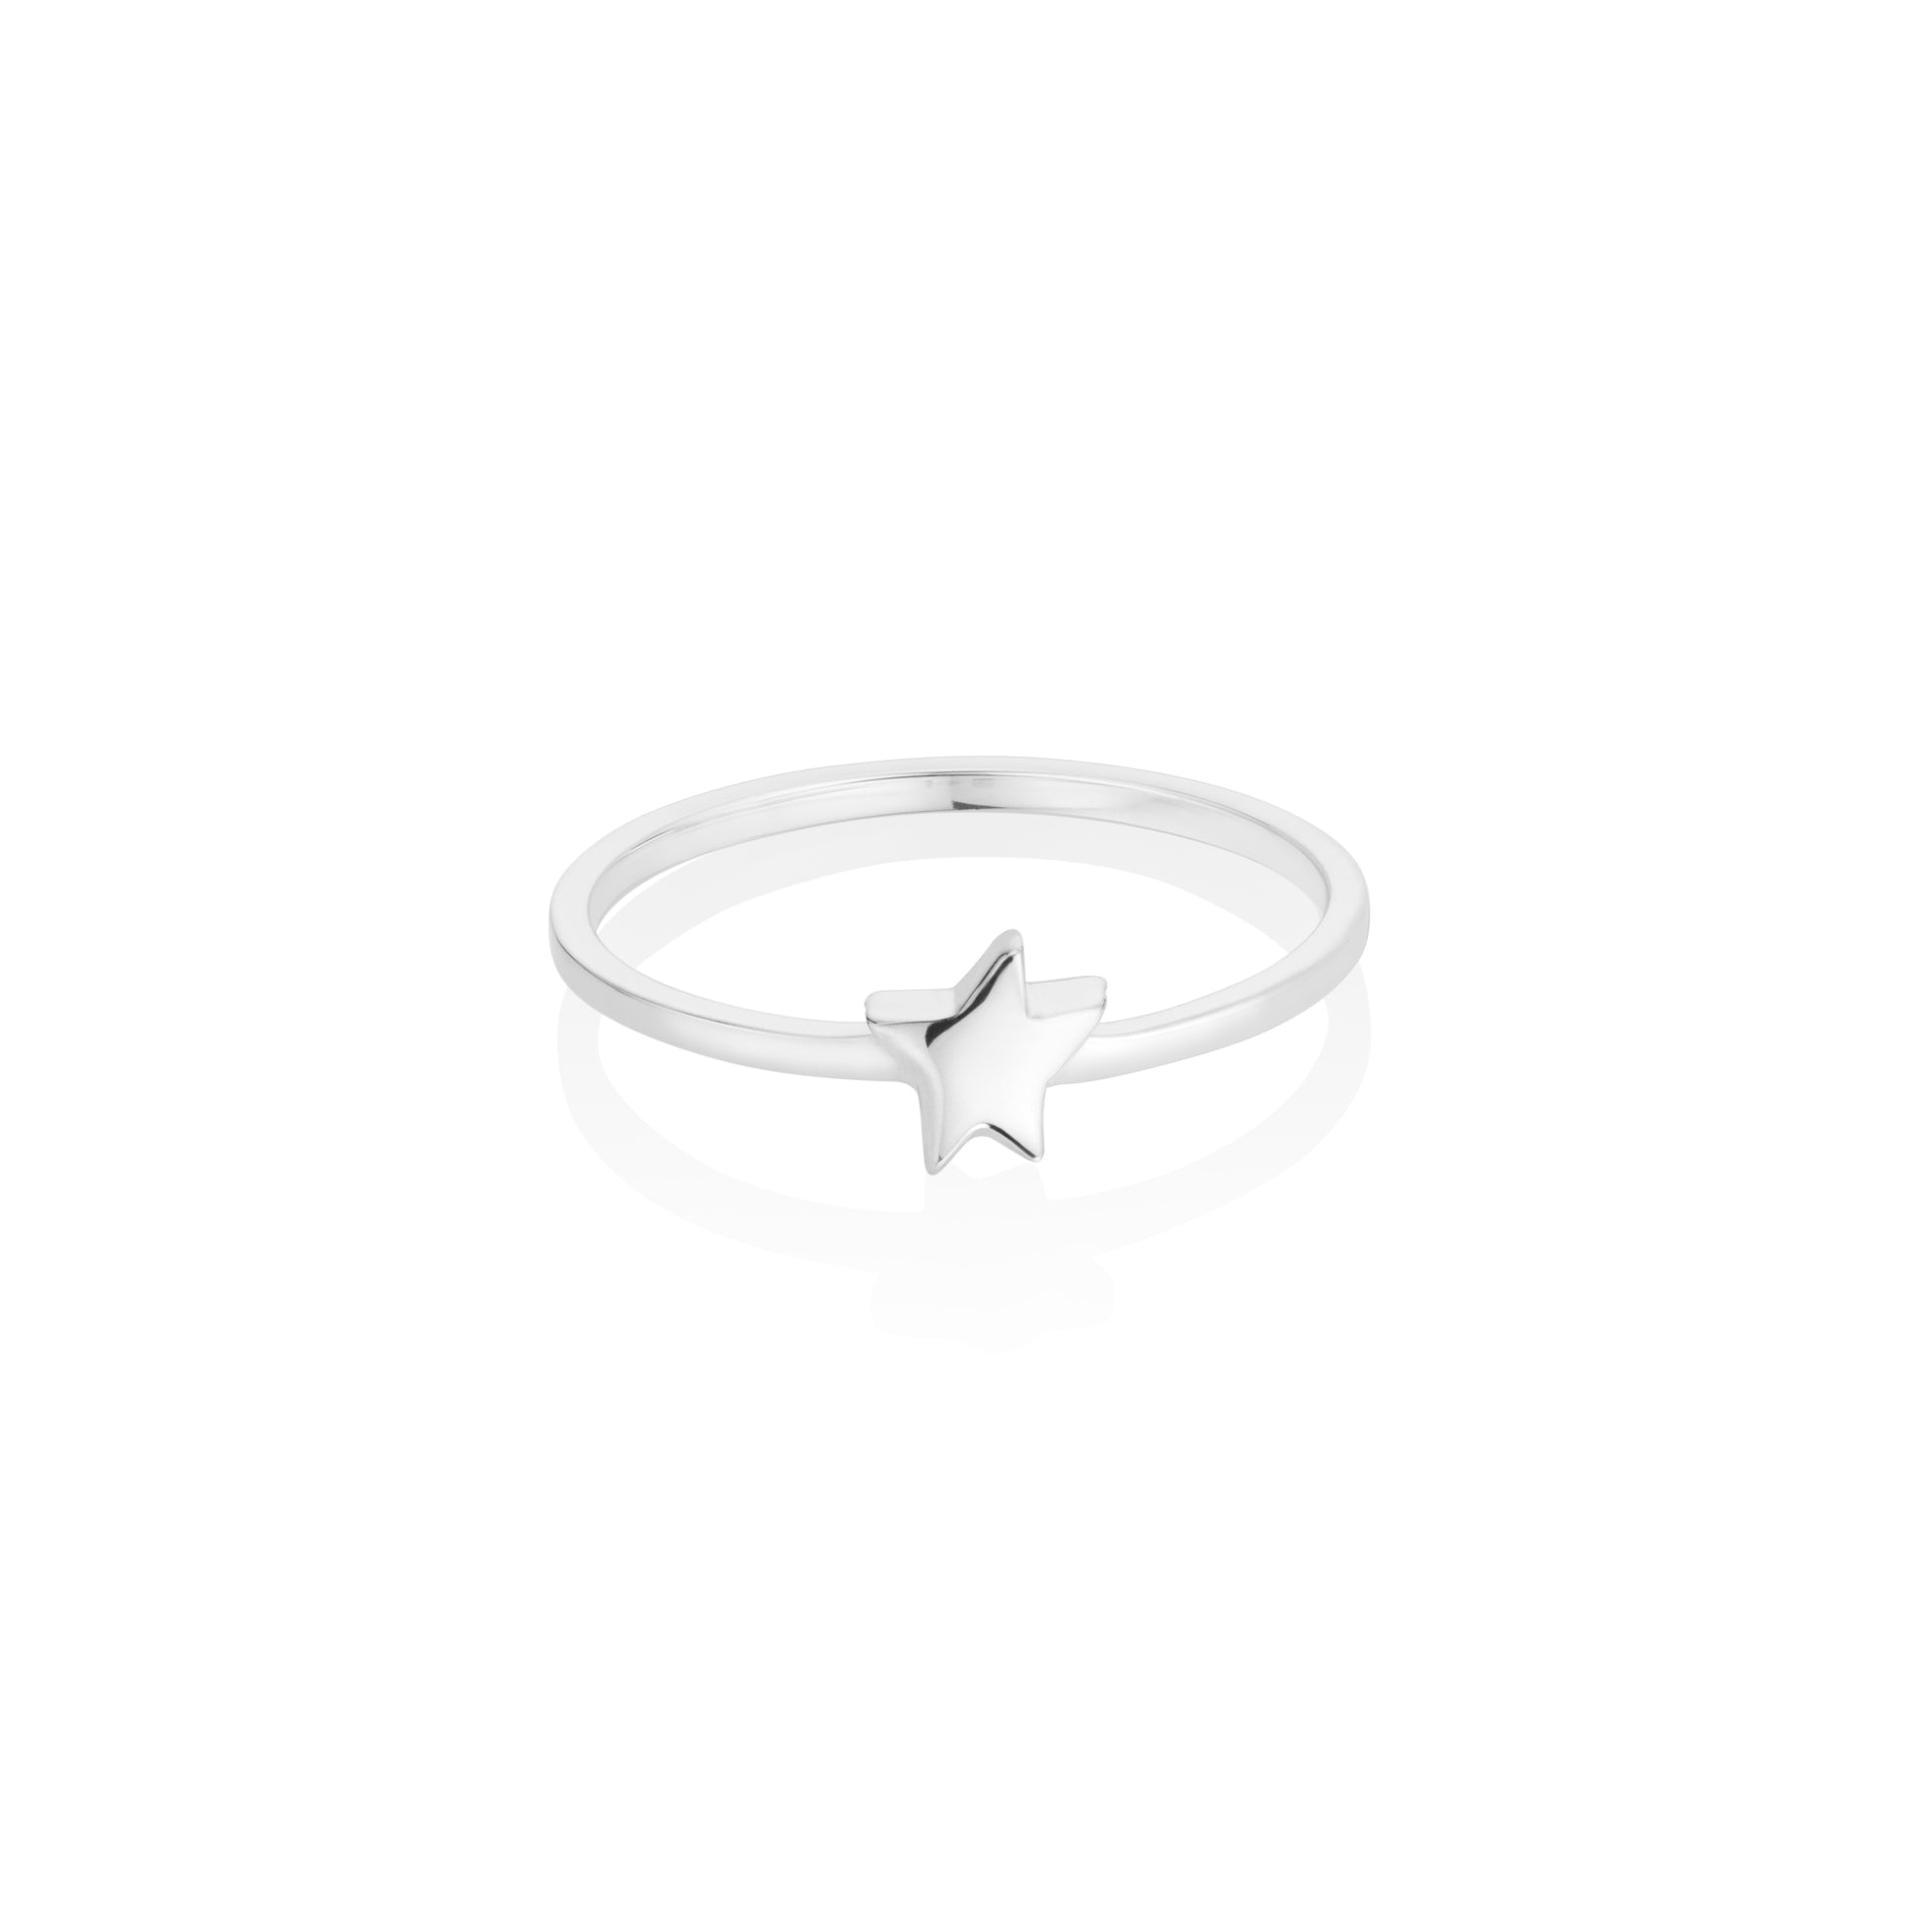 Étoile Mini Star Ring from Serena Van Rensselaer x Le Petit Prince© Collection